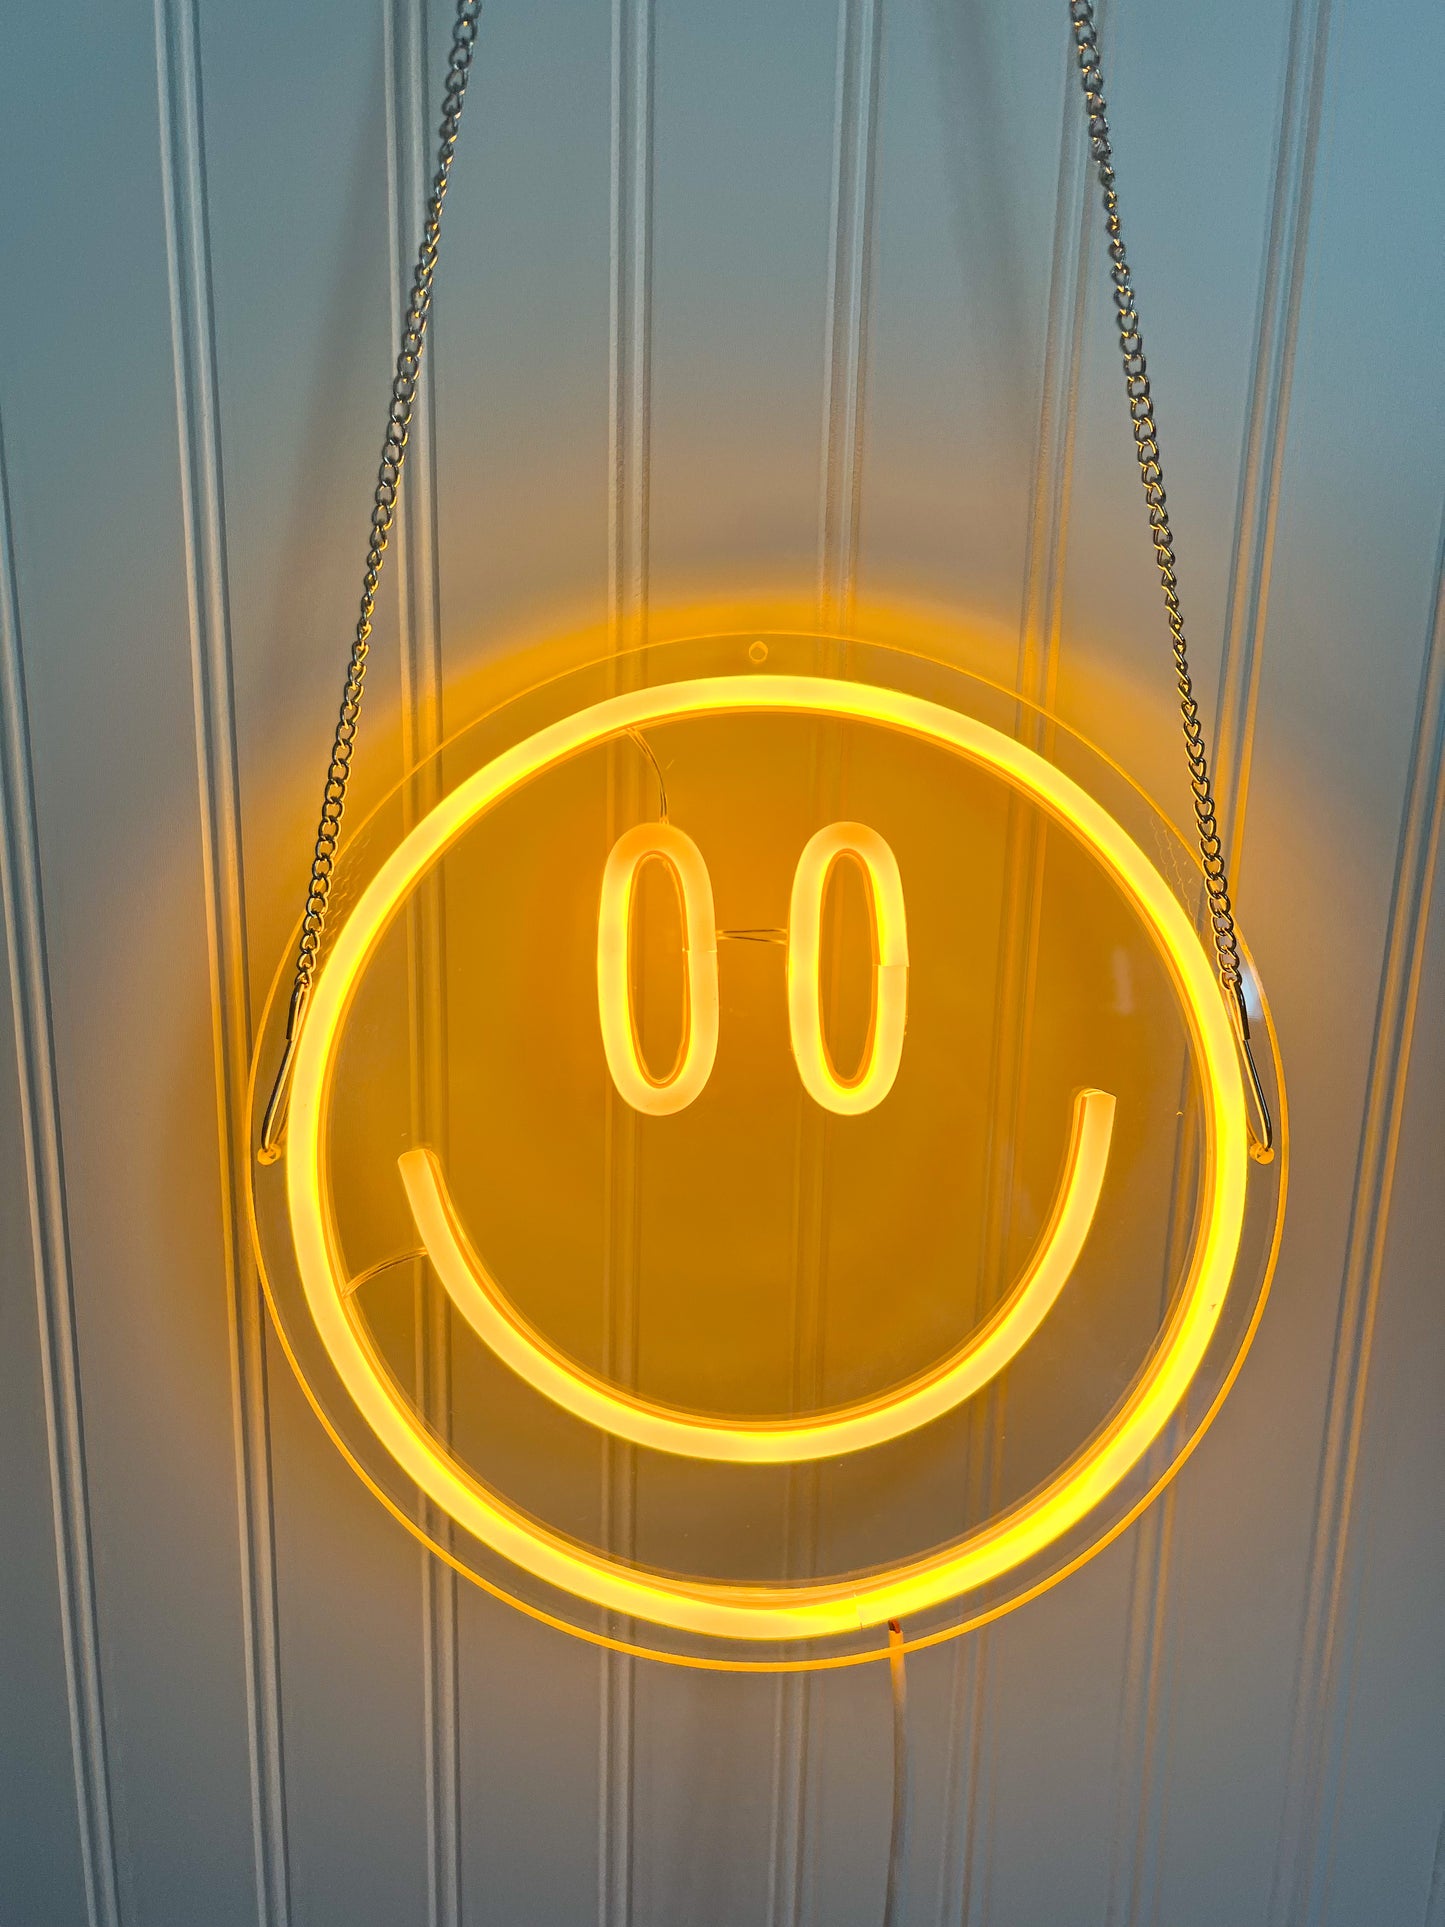 Neon happy face LED light (more colors)